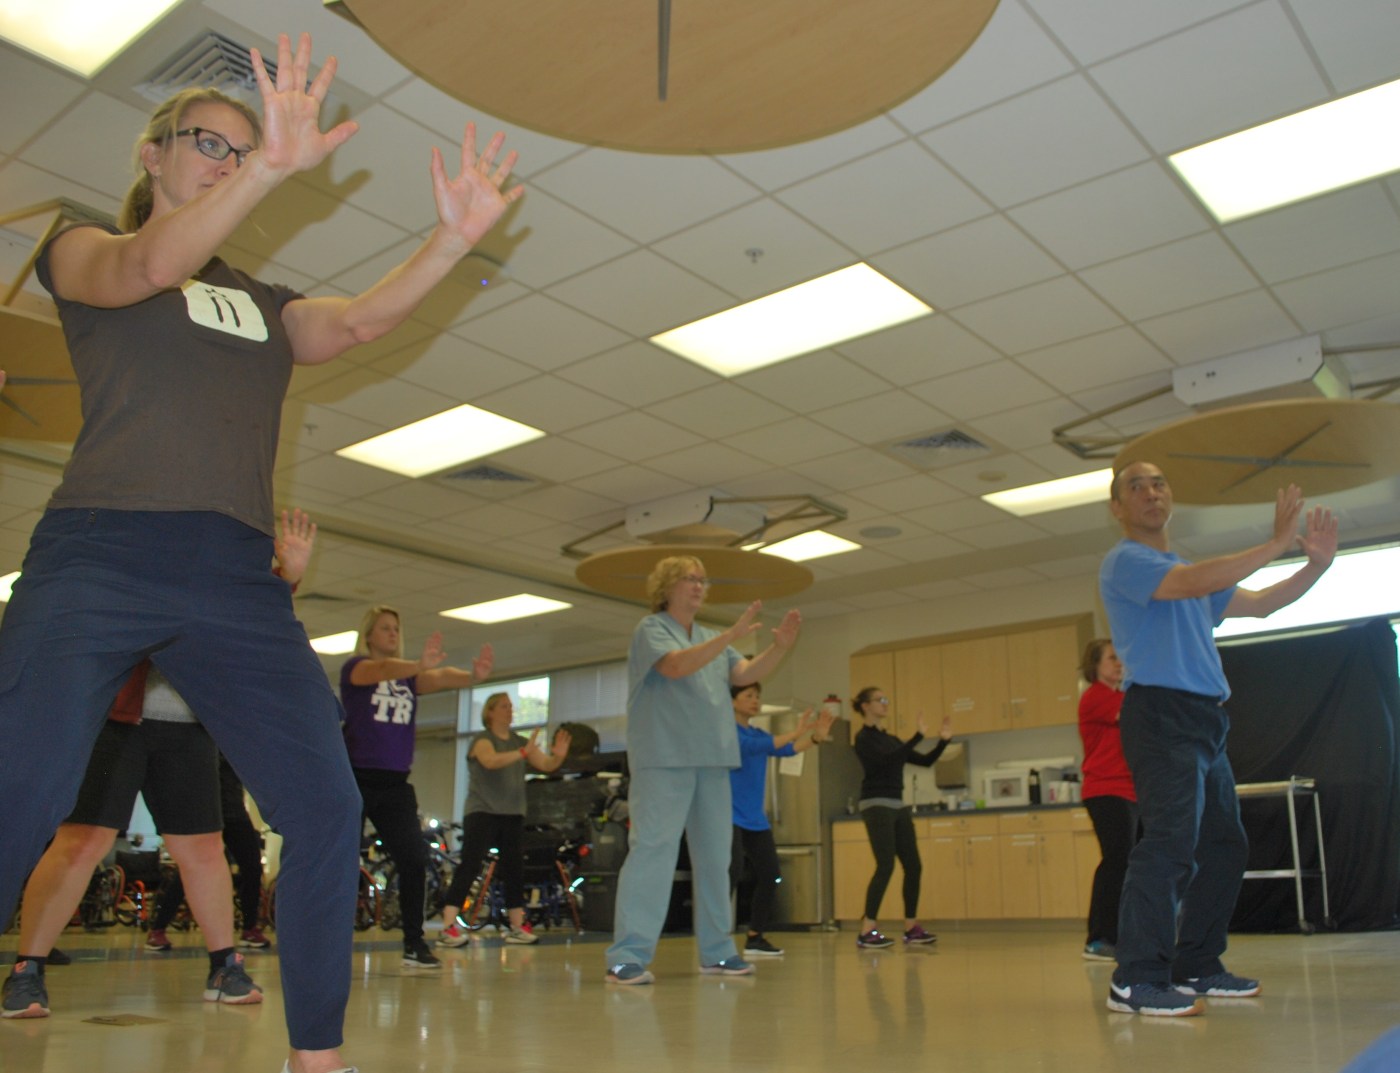 VA workers and patients in tai chi, mid pose.